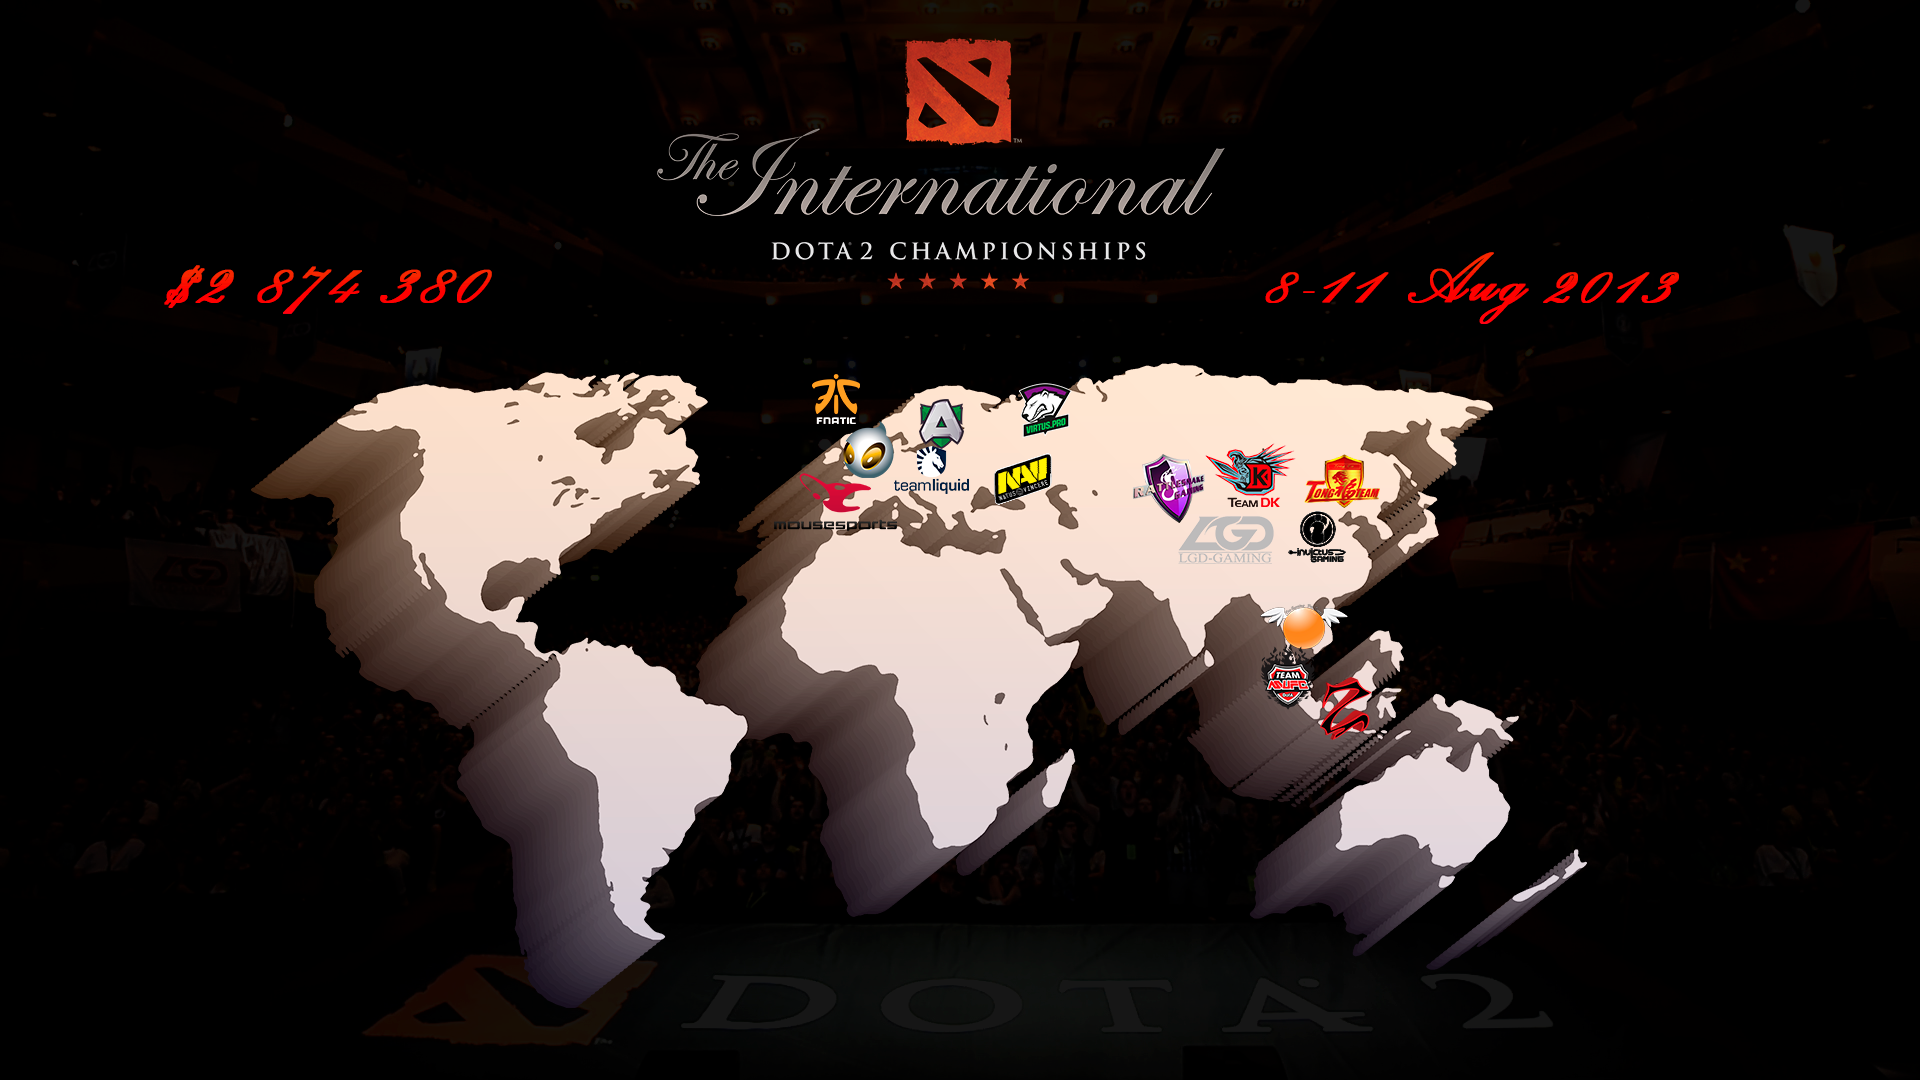 The first All-national Dota 2 Champions 2013: Team Alliance then ...